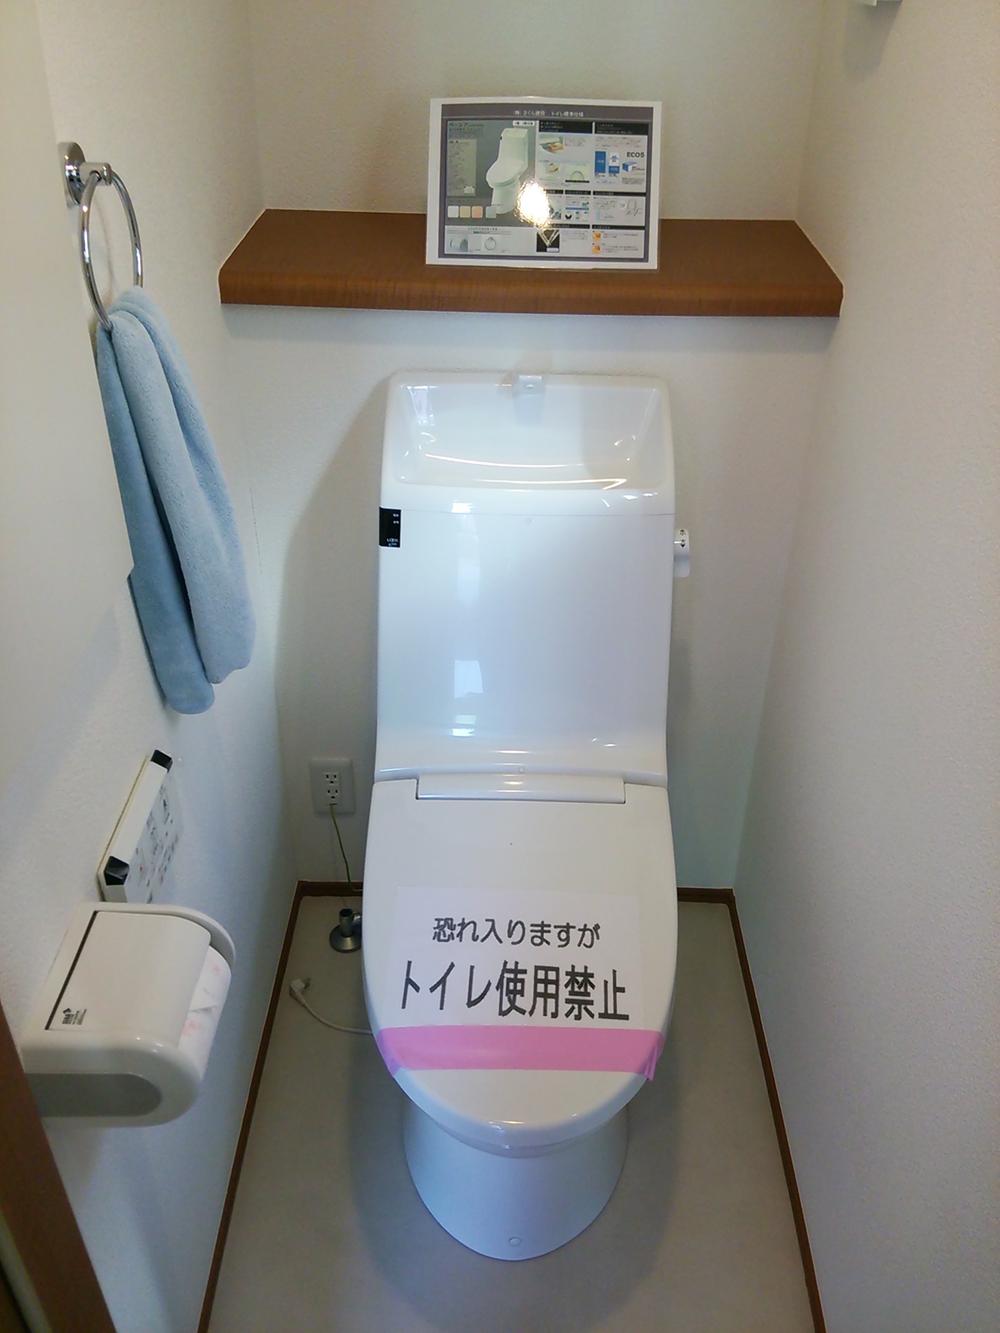 Toilet. Restroom with a bidet!